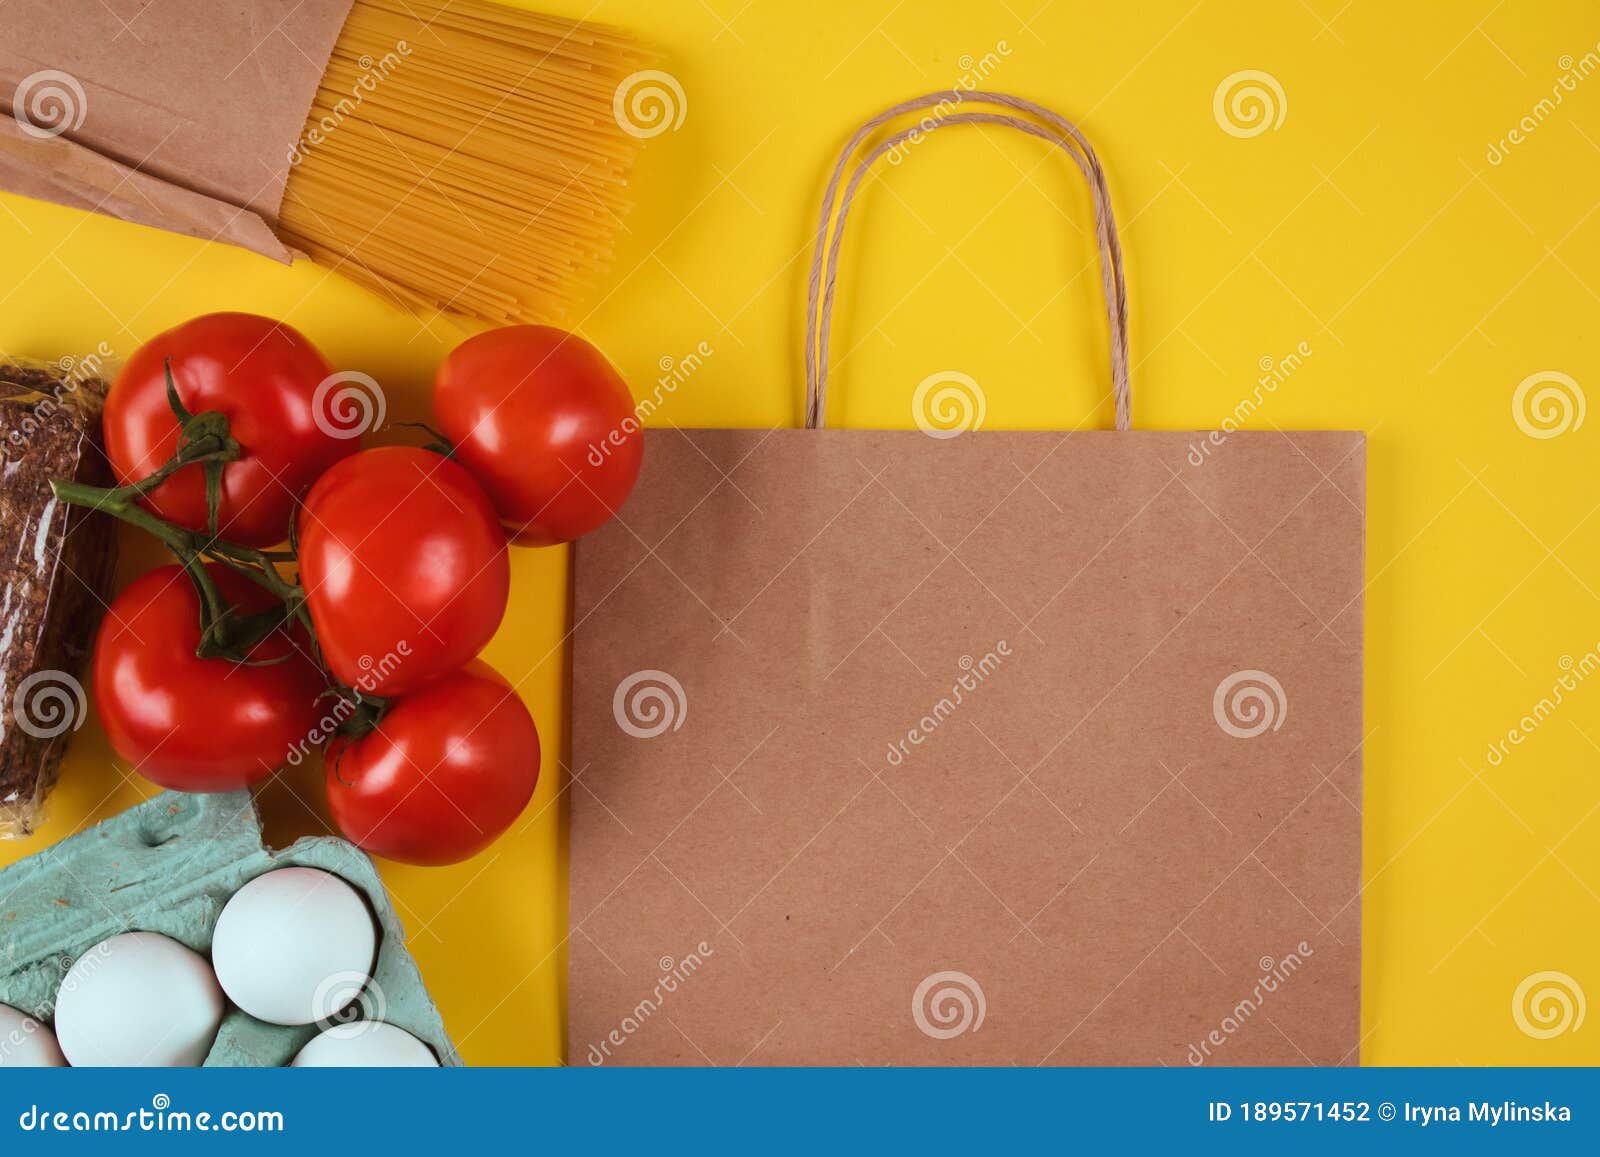 Download 1 695 Mockup Pasta Photos Free Royalty Free Stock Photos From Dreamstime